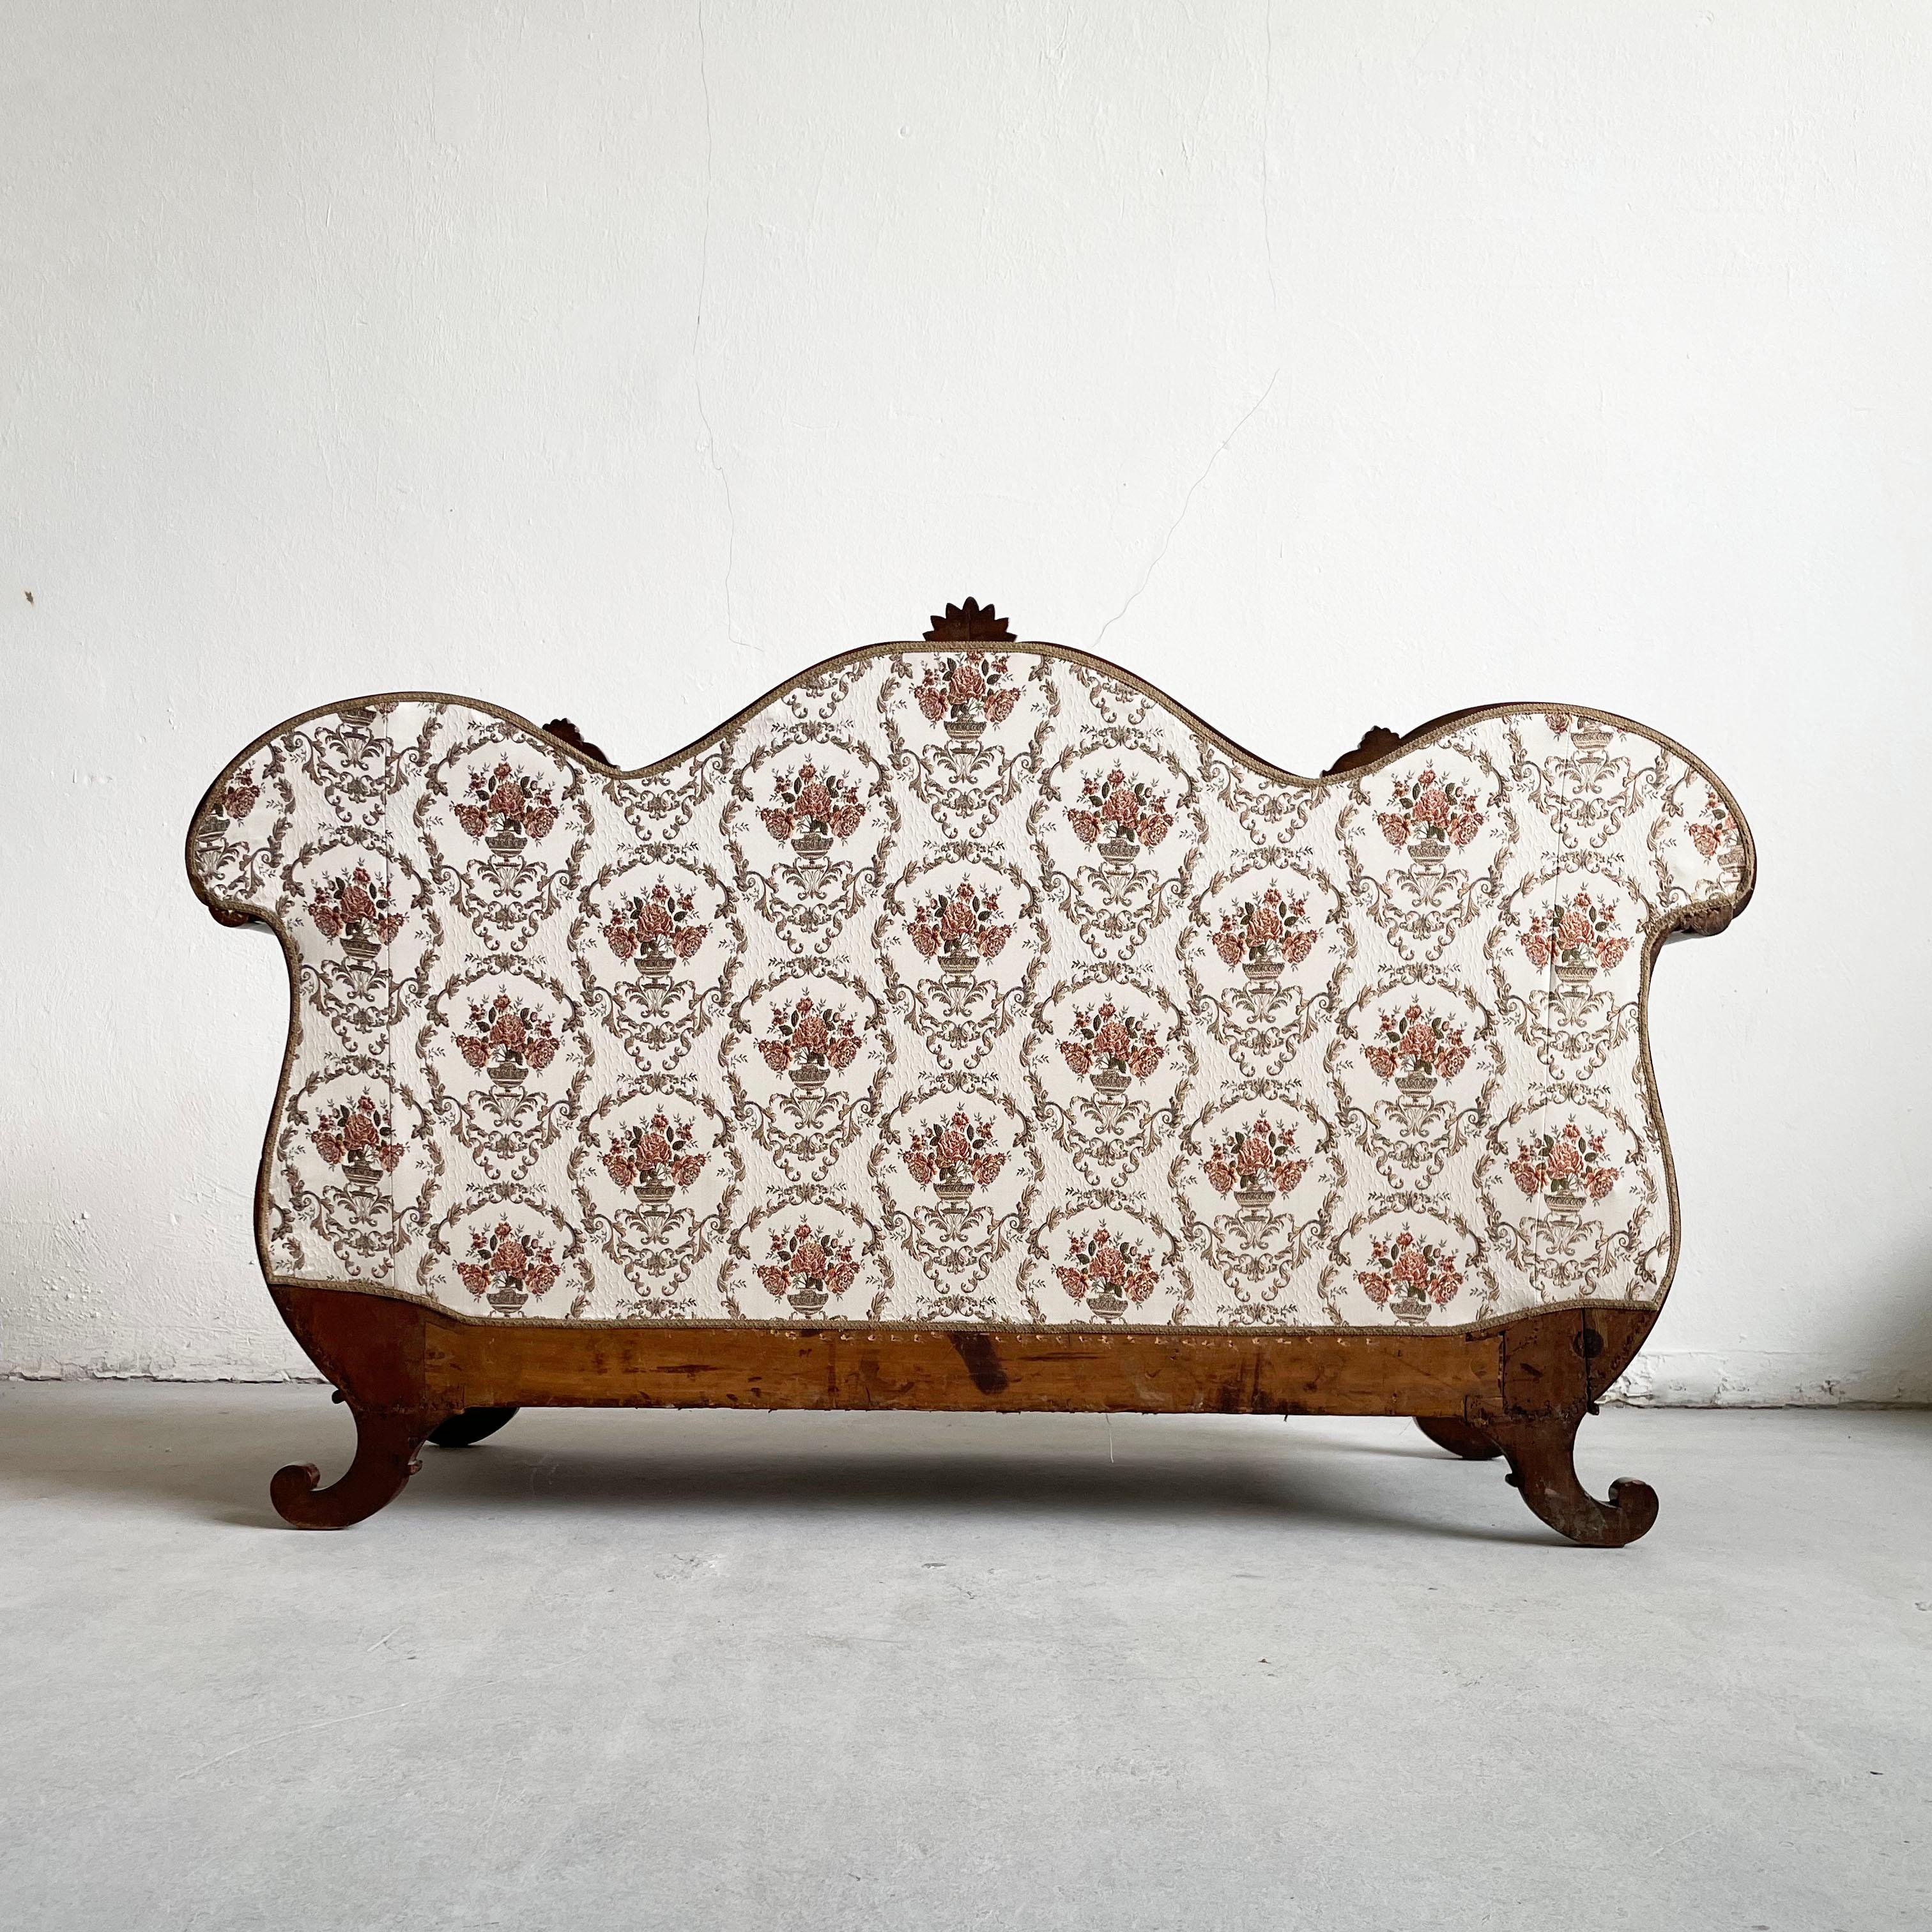 Very finely crafted antique boat-shaped sofa in solid walnut and walnut ornaments, with cornucopia legs and curved frame. Seat and backrest upholstered.

Mid-19th century, Northern Italy
 
The sofa has been professionally restored, new